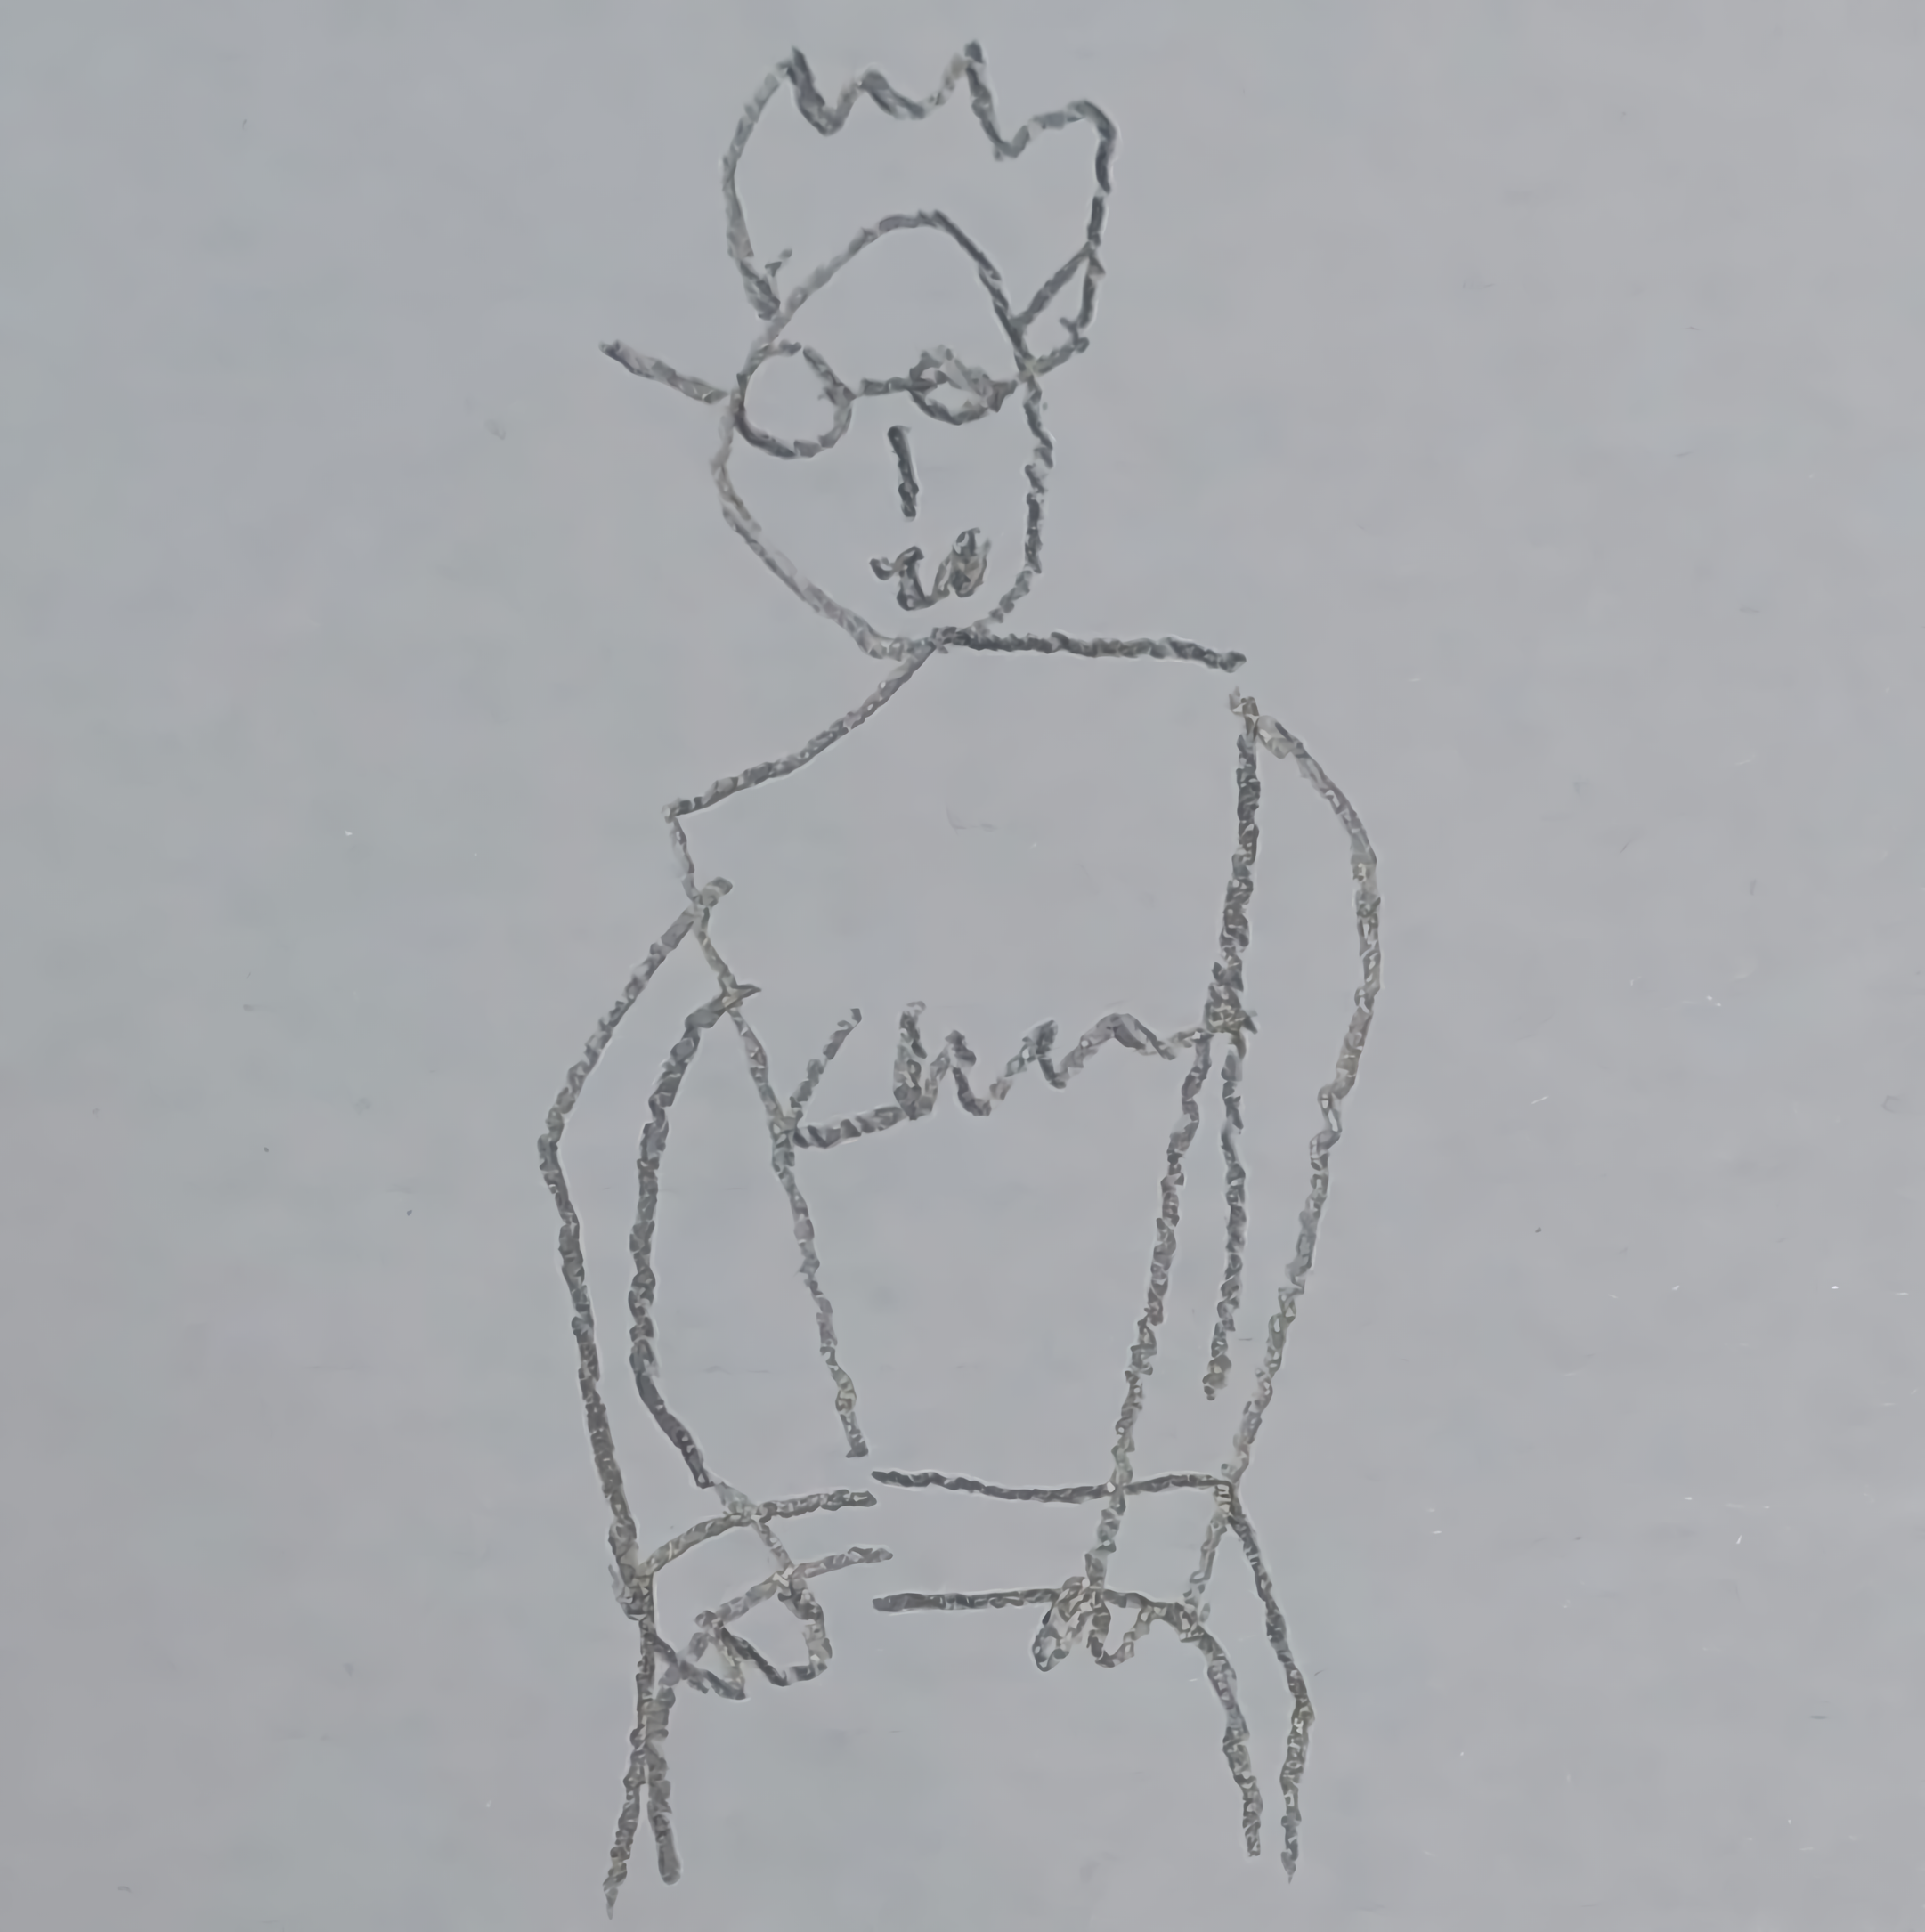 pencil-on-paper drawing of Riki Miyamura sitting and wearing a Champion jumper after winning a speed sudoku competition